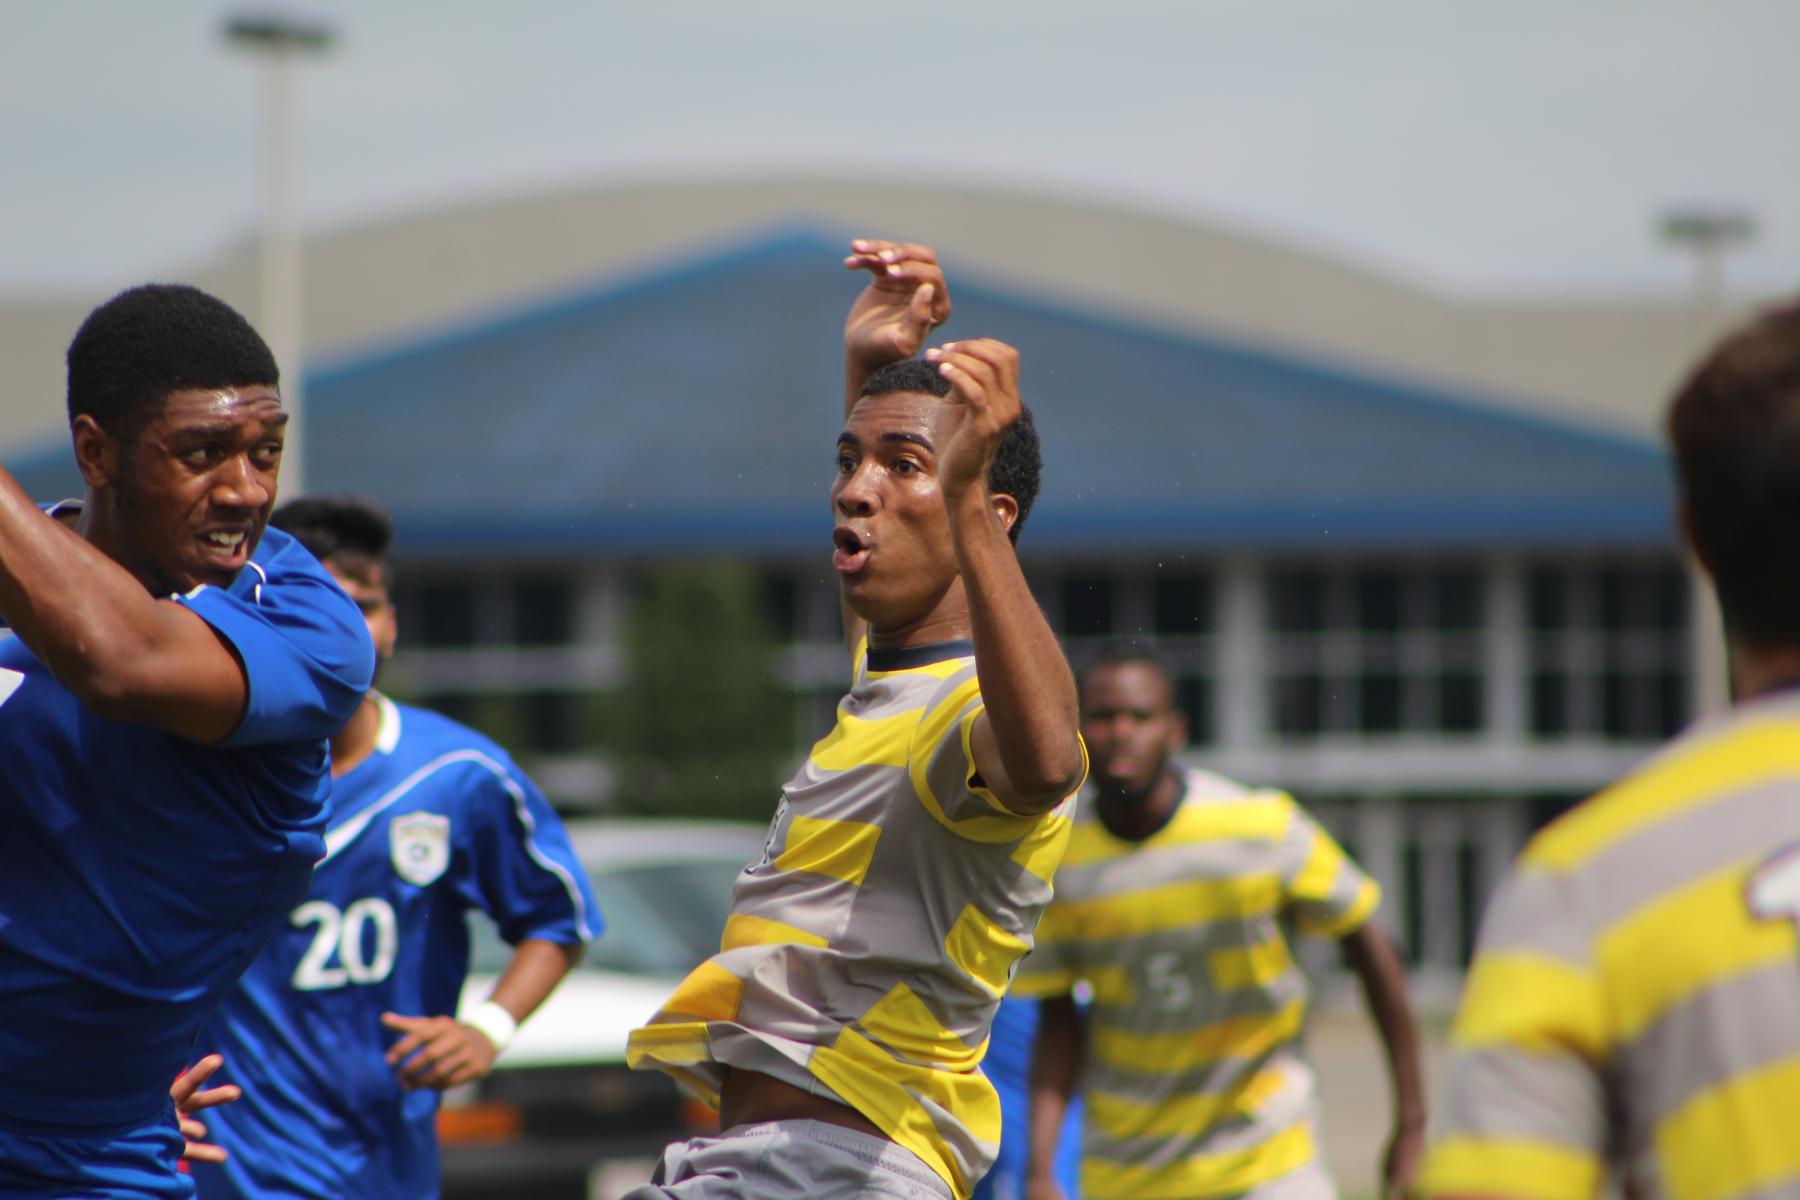 No. 7 MCC drops NIACC 3-2 in double overtime